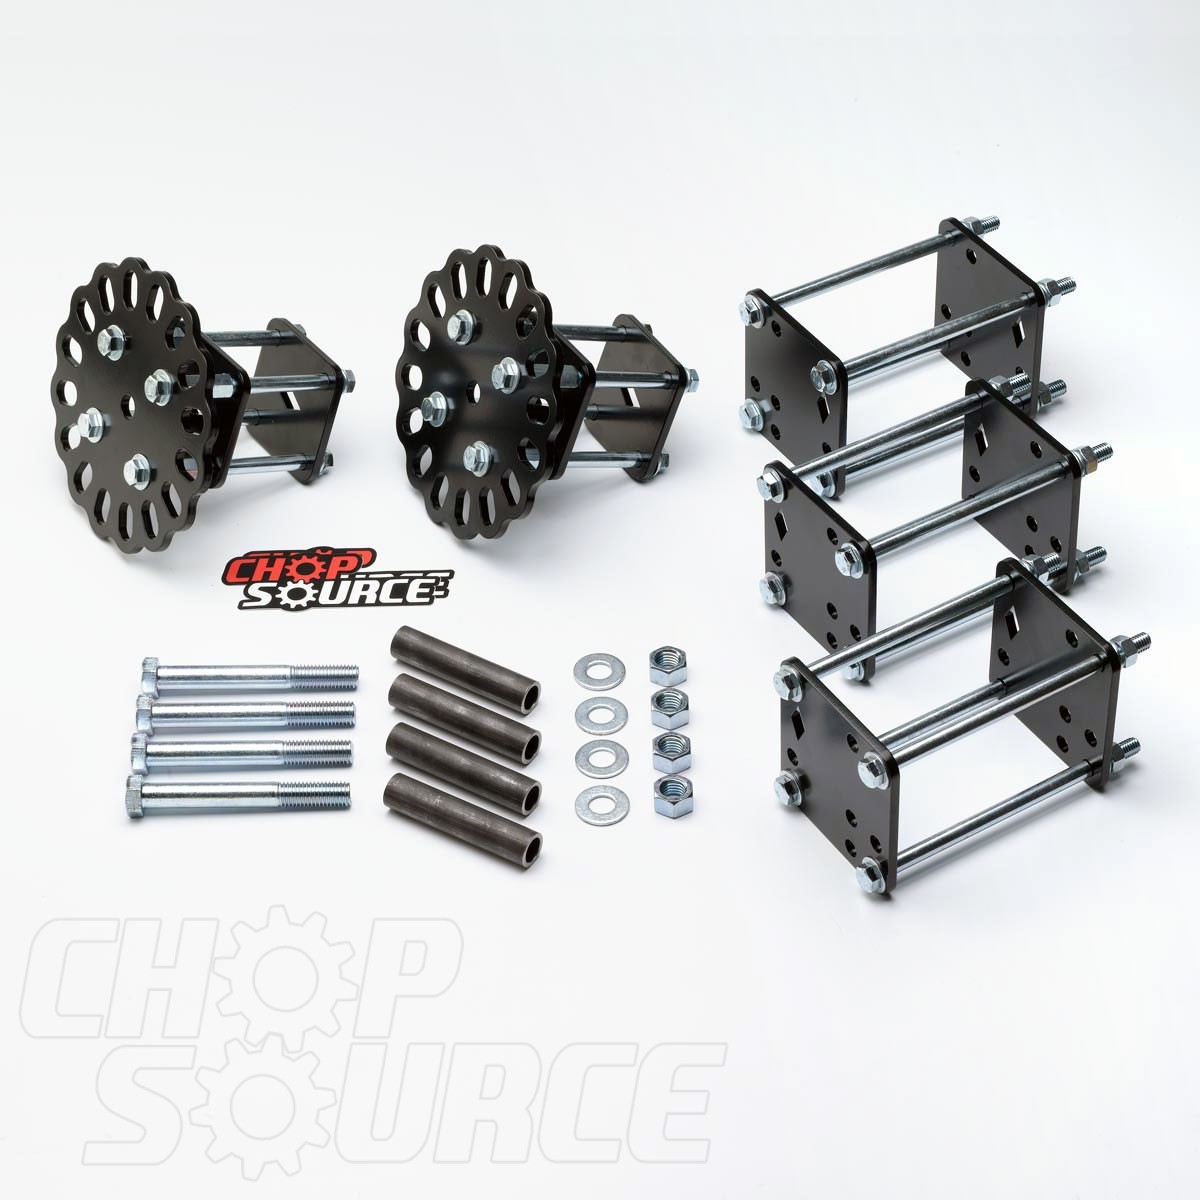 Chop Source Motorcycle Frame Jig Rotisserie Stand